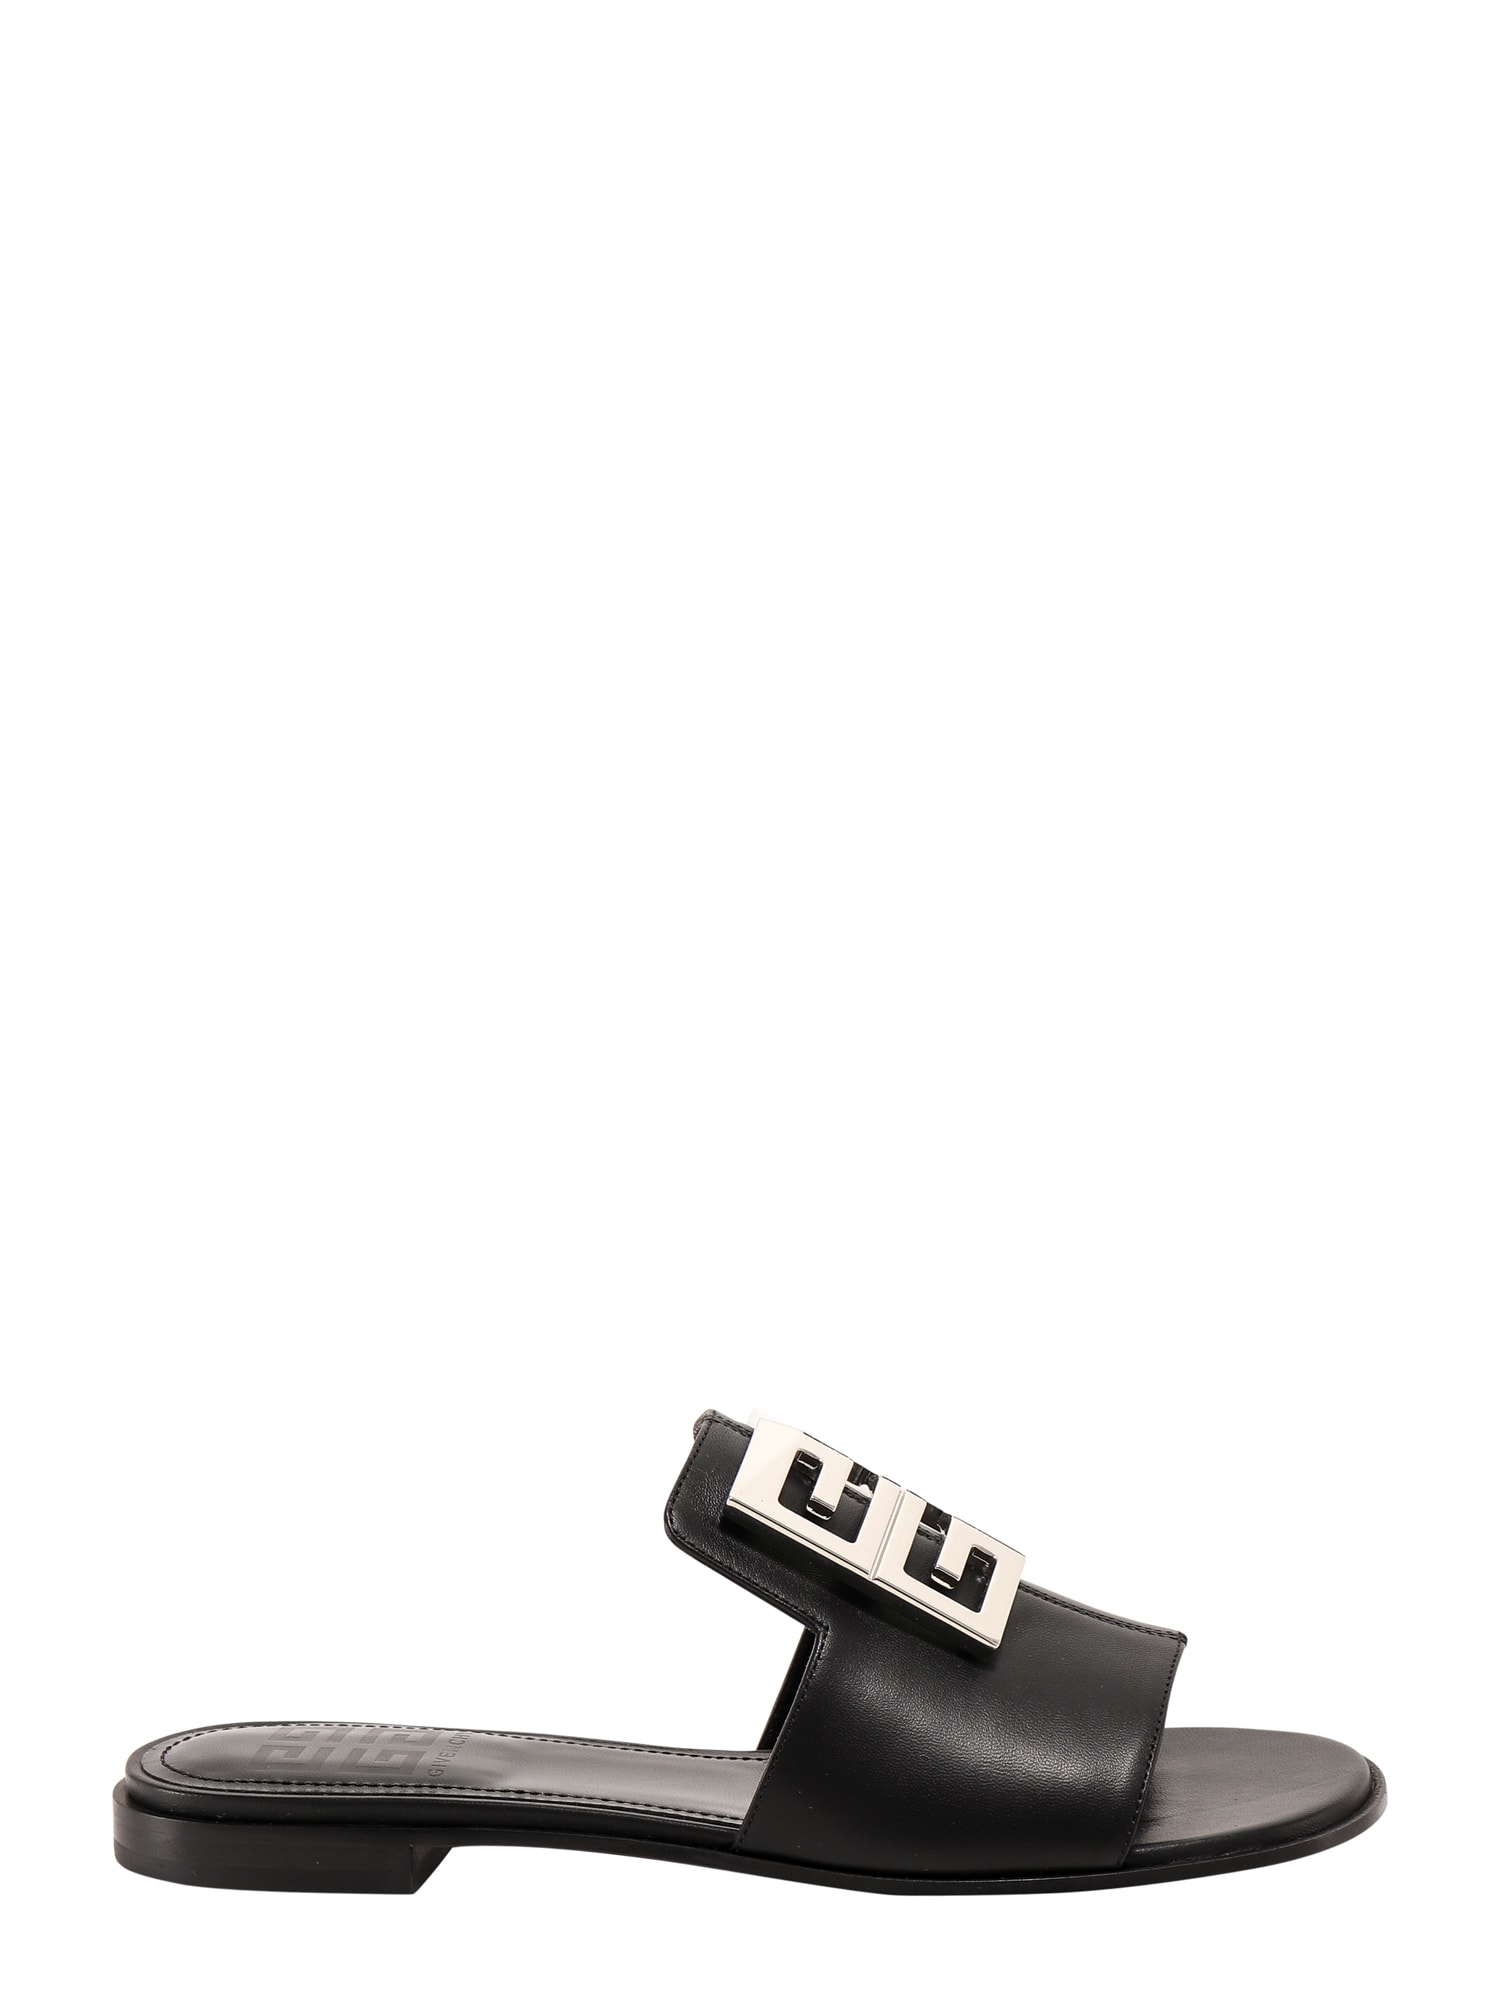 Givenchy Flat Sandals